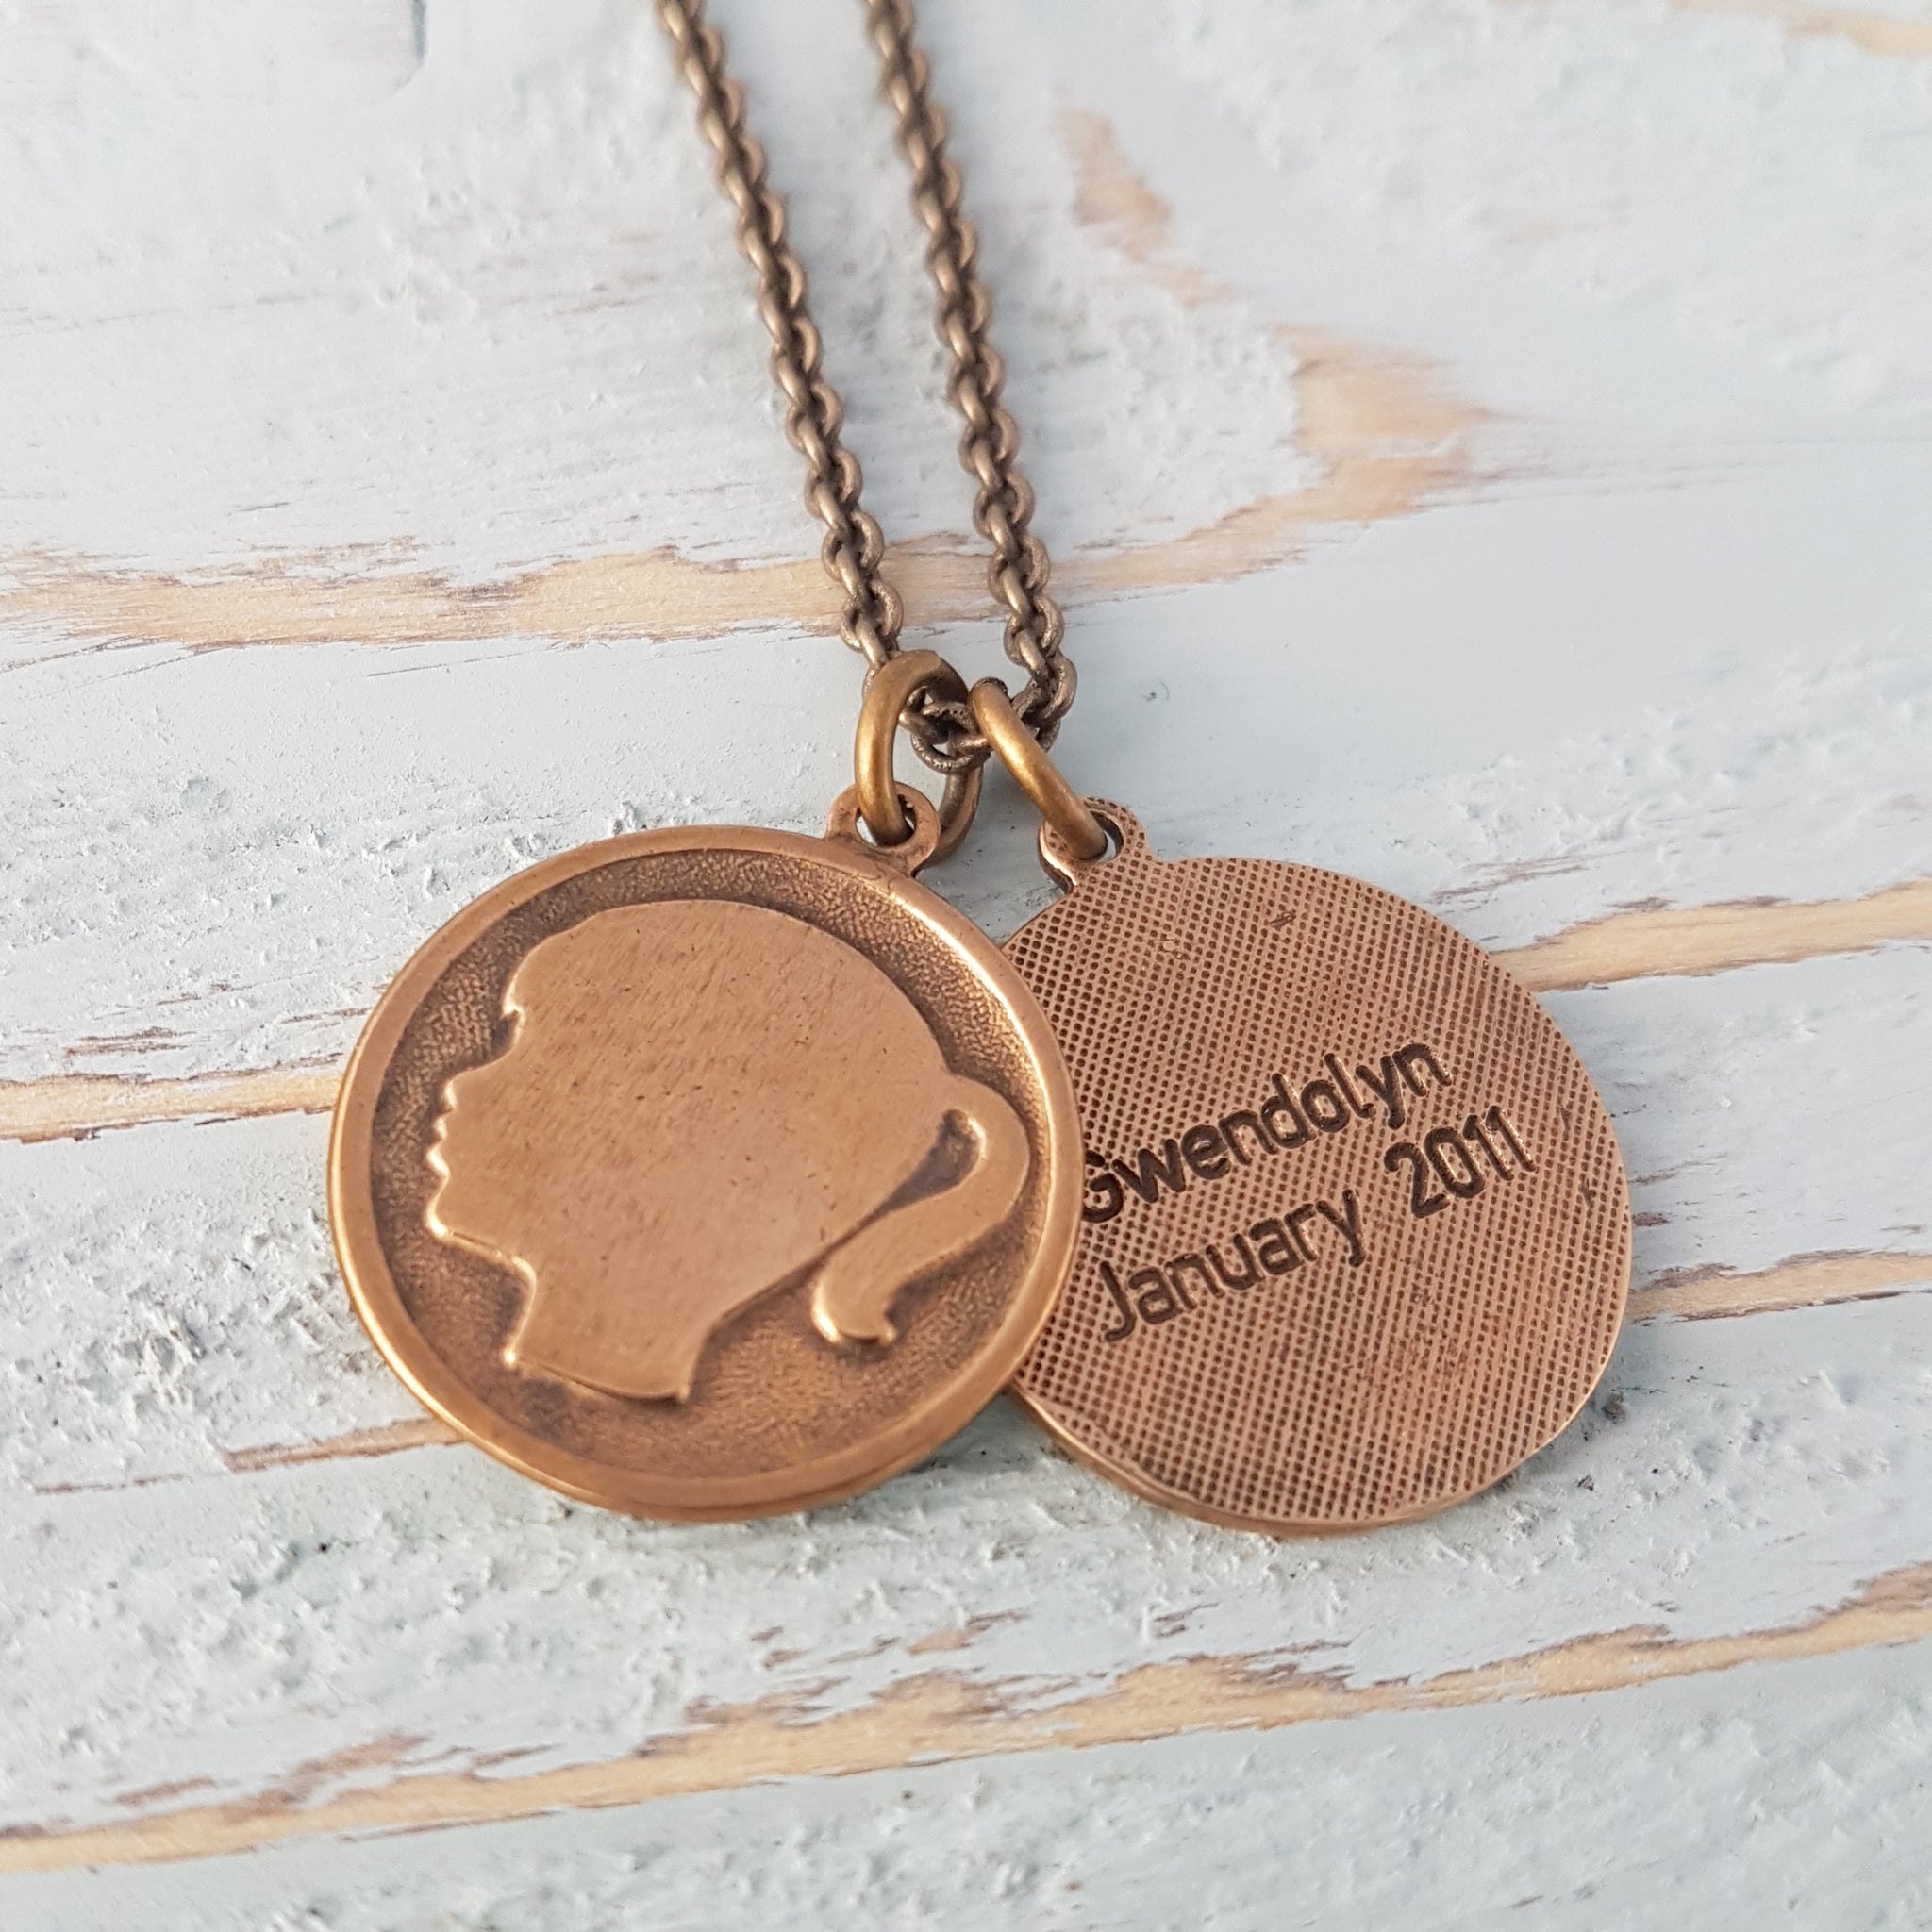 Son or Daughter Silhouette Necklace - Necklace for Mom - Gwen Delicious Jewelry Designs